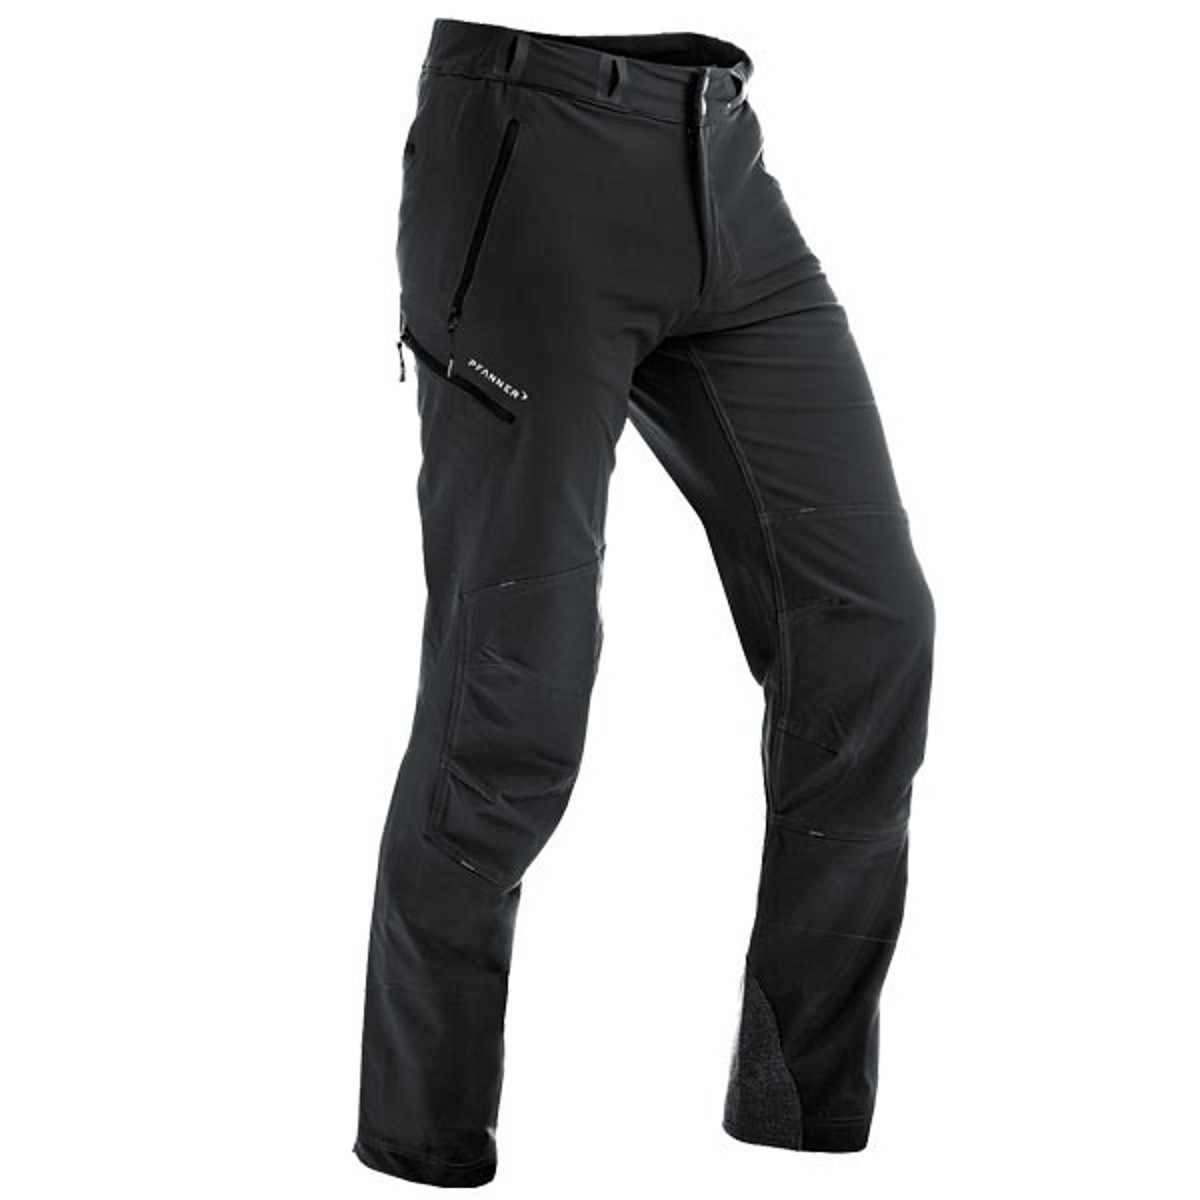 Pfanner Concept outdoor trousers